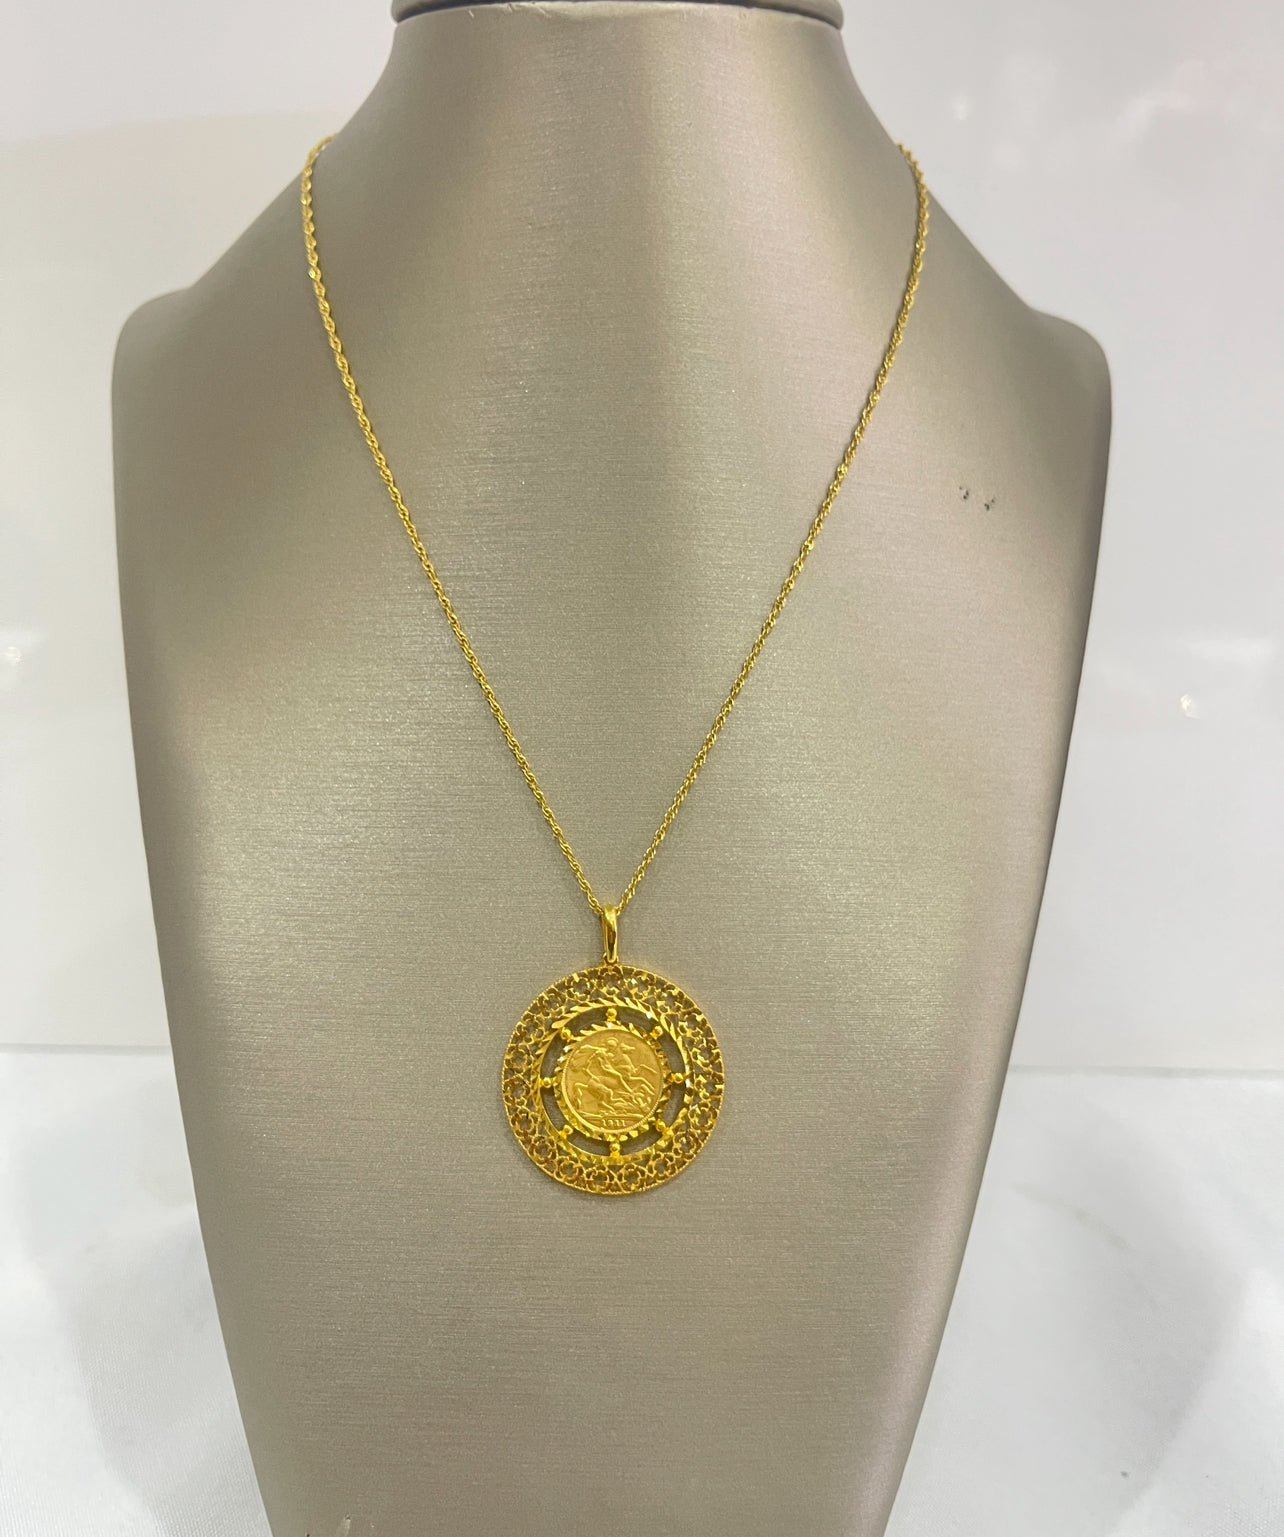 21k Gold Coin Necklace